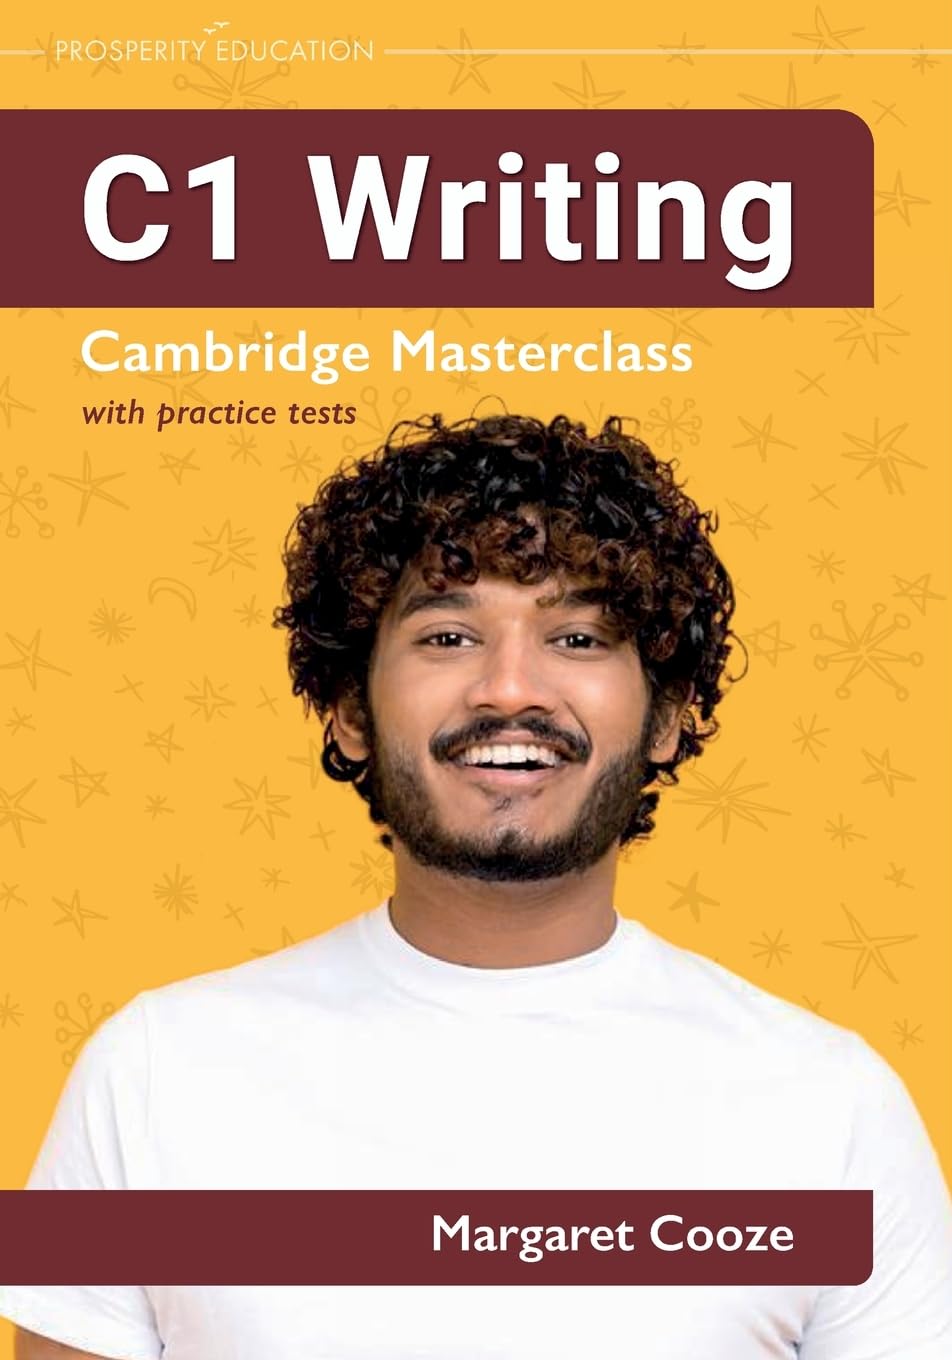 C1 Writing Cambridge Masterclass With Practice Tests | Margaret Cooze